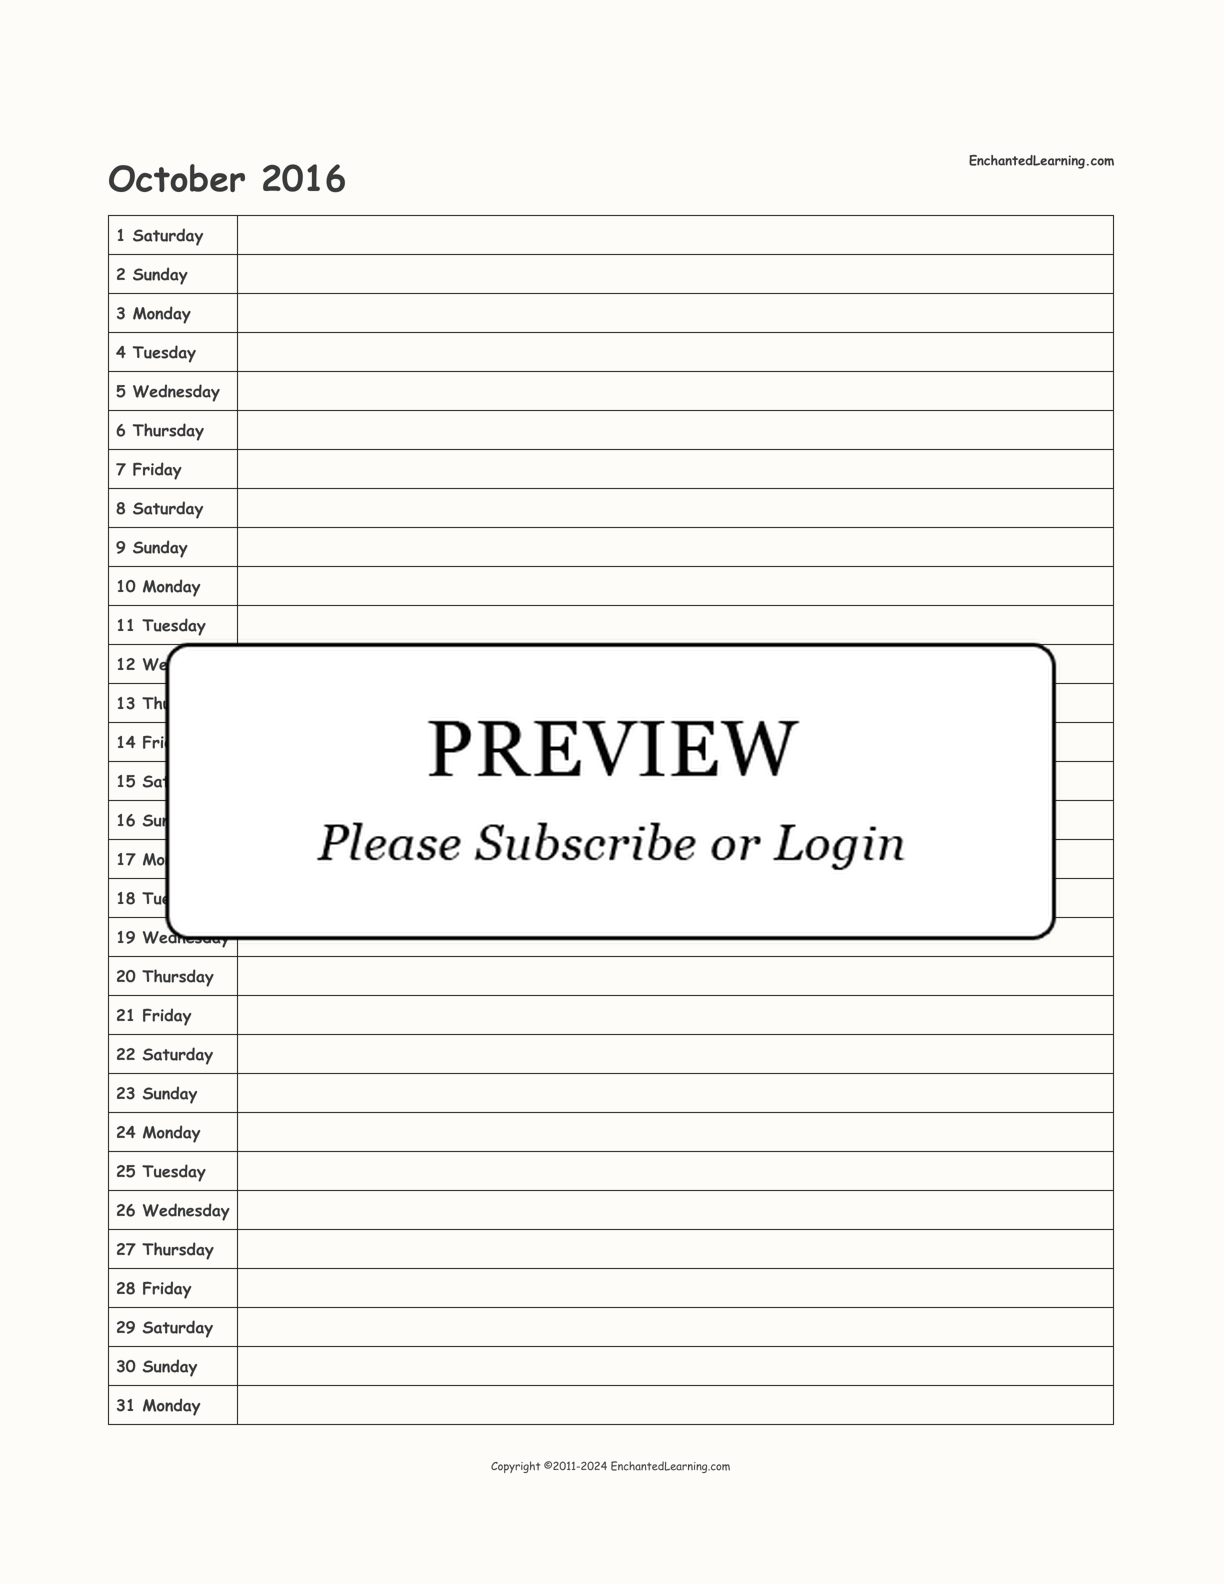 2016 Scheduling Calendar interactive printout page 10